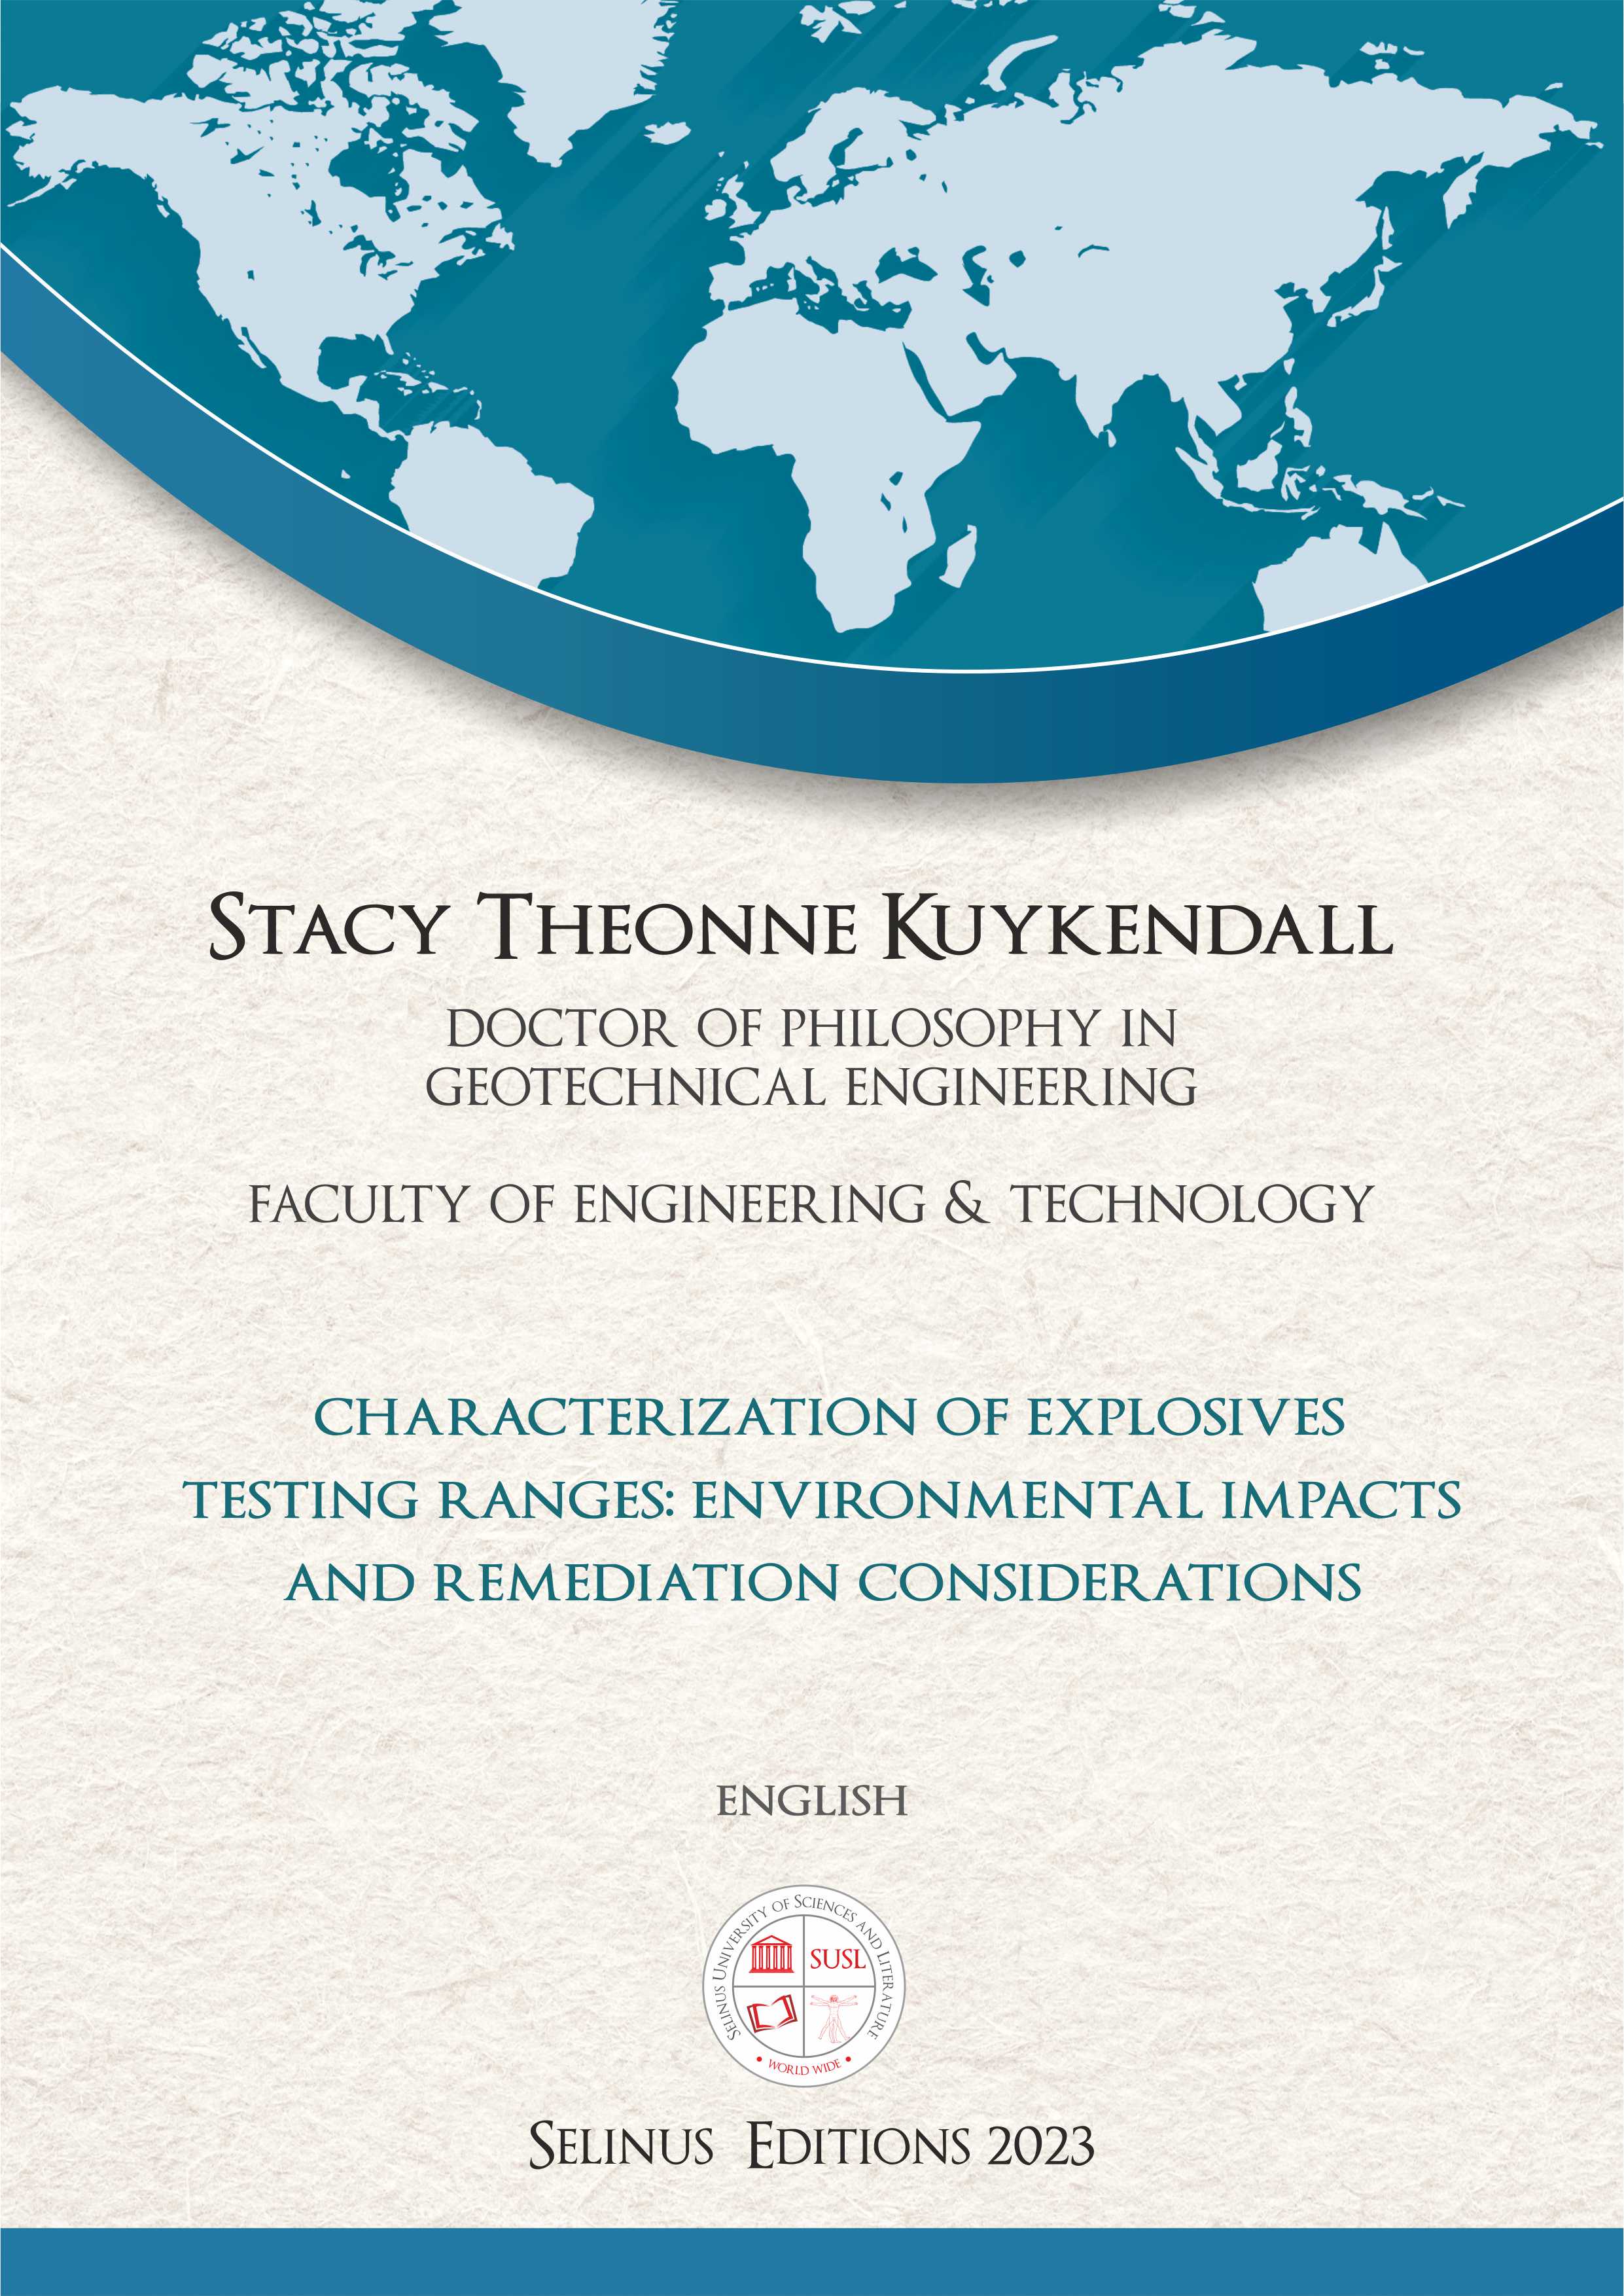 Thesis Stacy Theonne Kuykendal